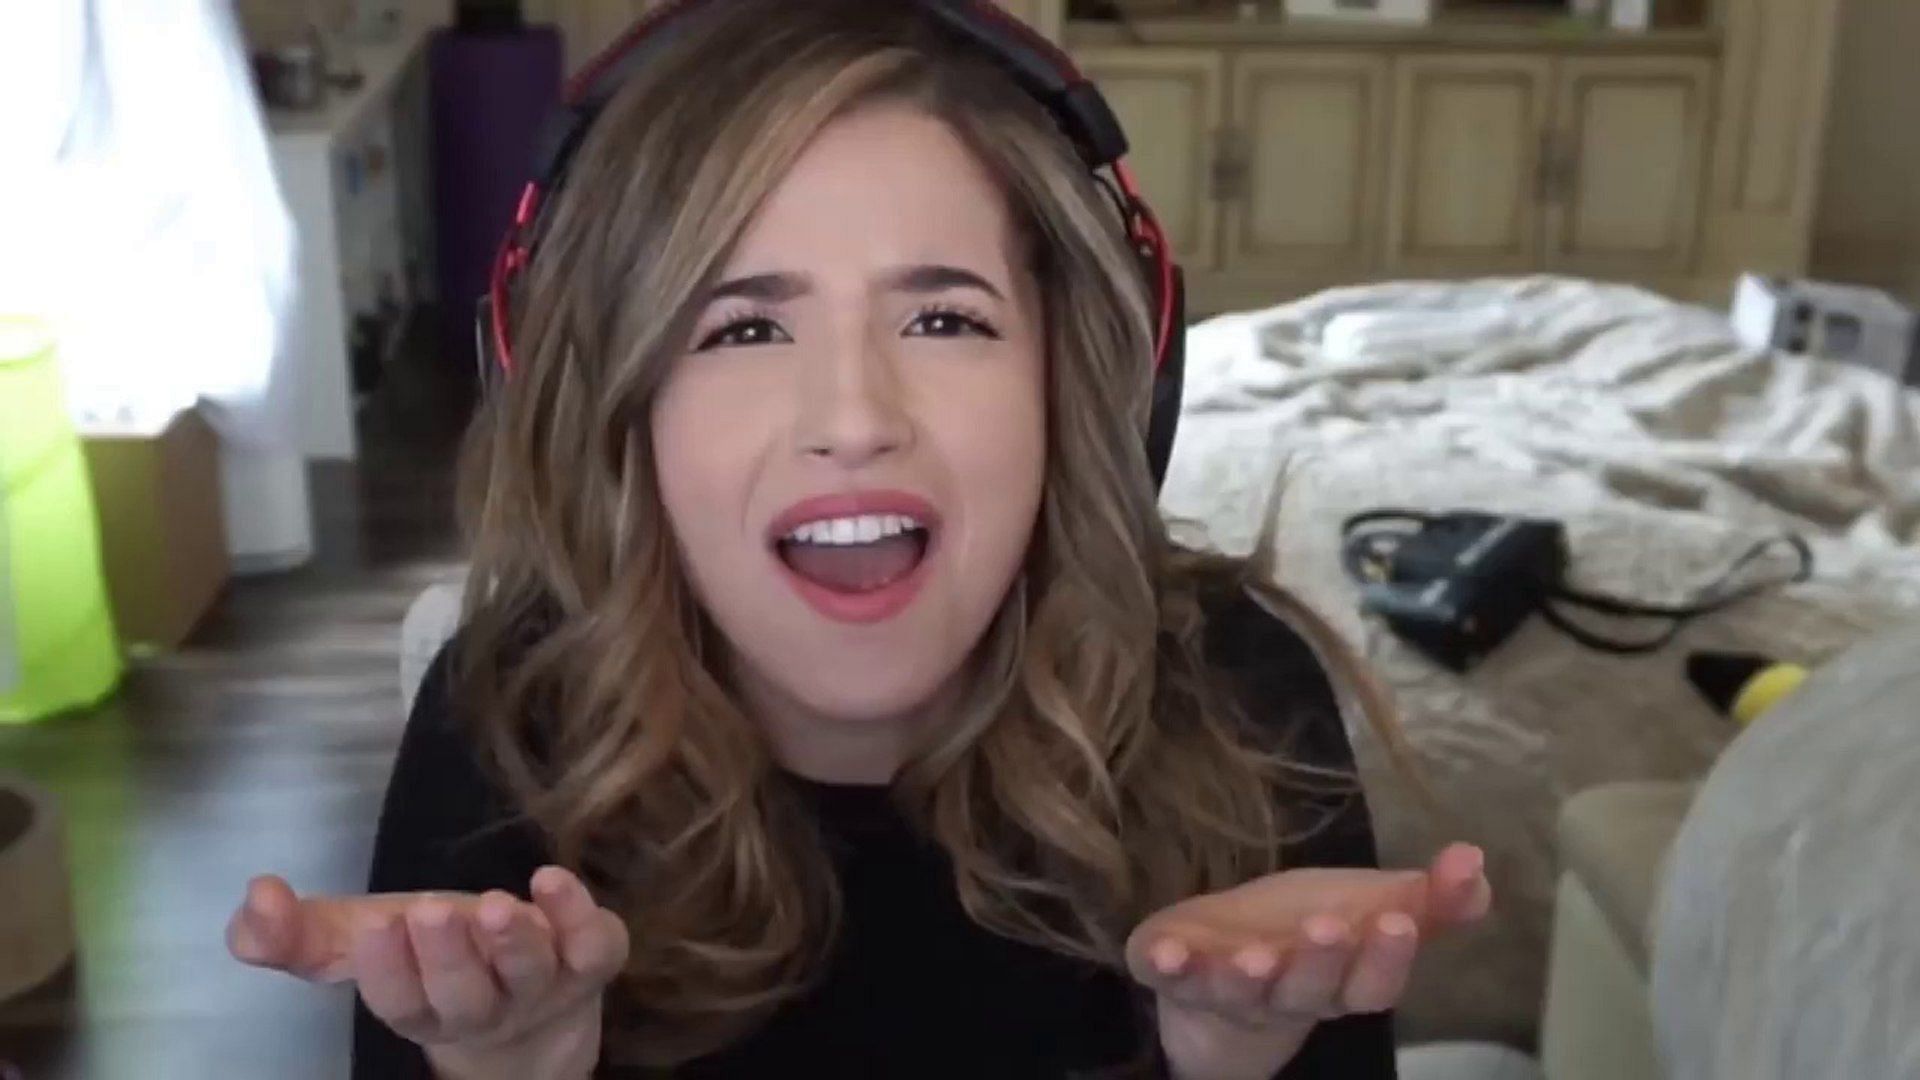 Pokimane Twitch Ban: Sykkuno, Disguised Toast, Ludwig, Lilypichu reacts to Pokimane getting banned for ‘Avatar’ stream